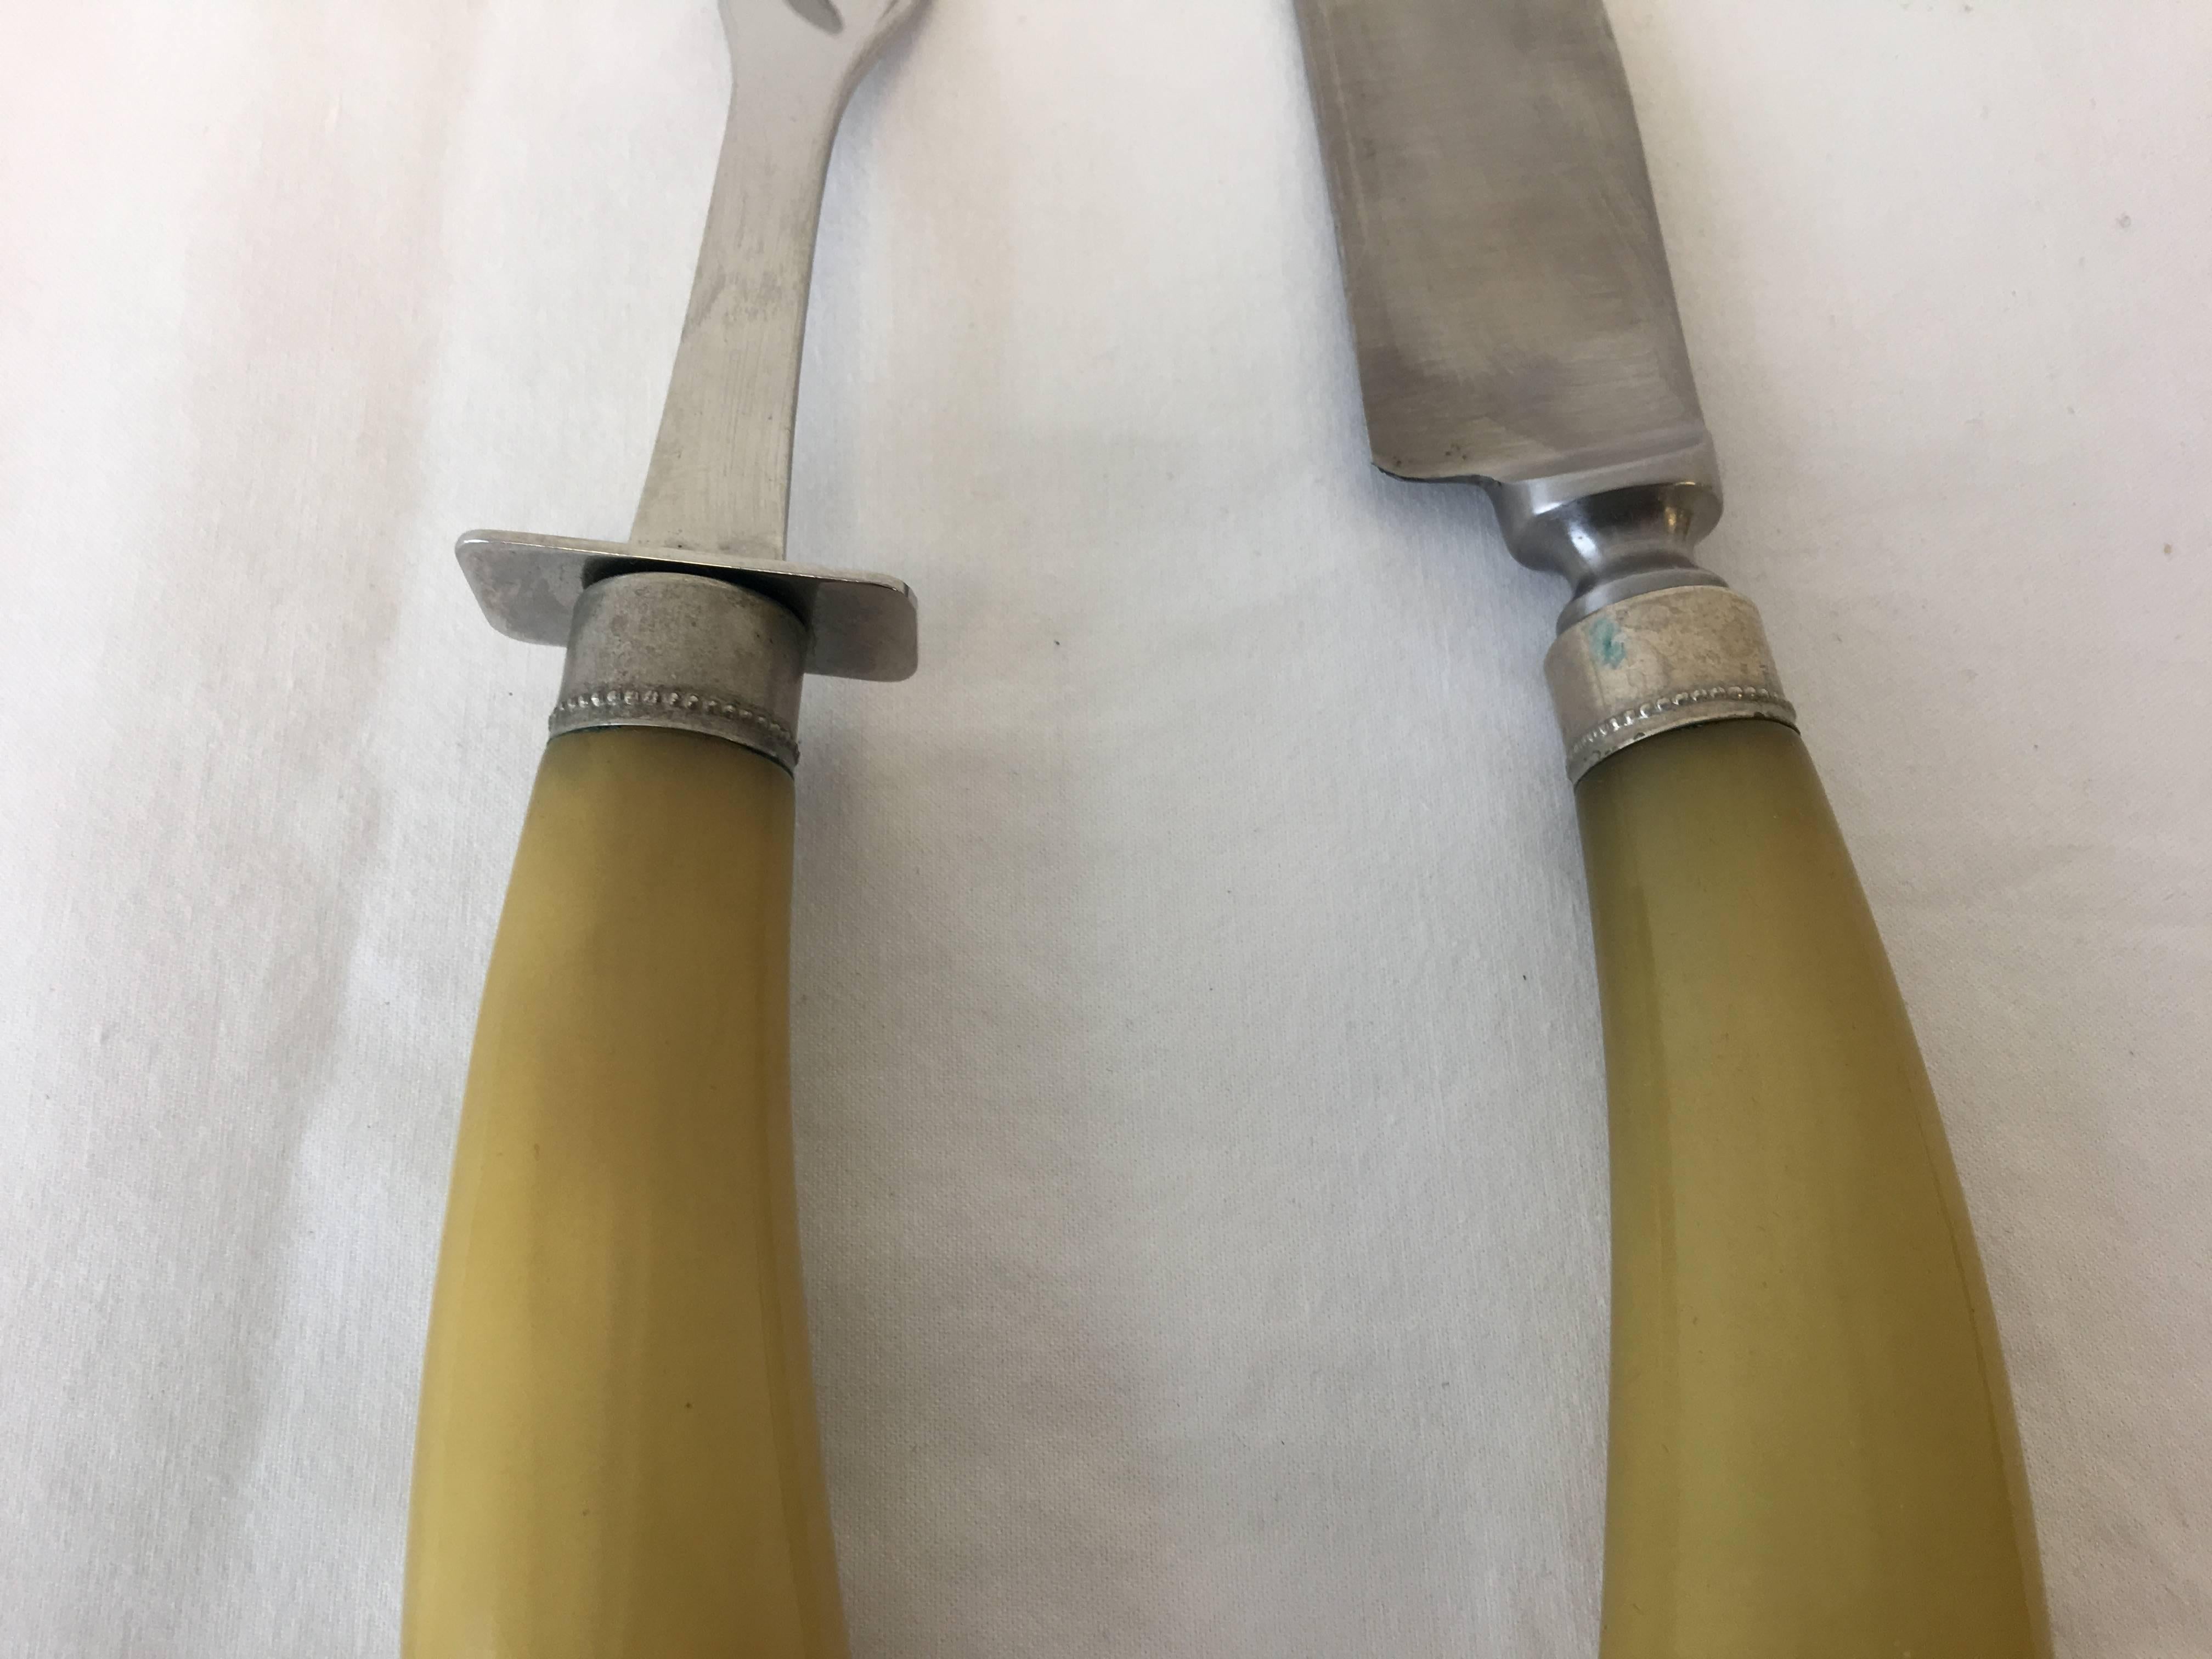 Listed are a gorgeous set of 1920s, Art Deco bakelite carving knife and fork.